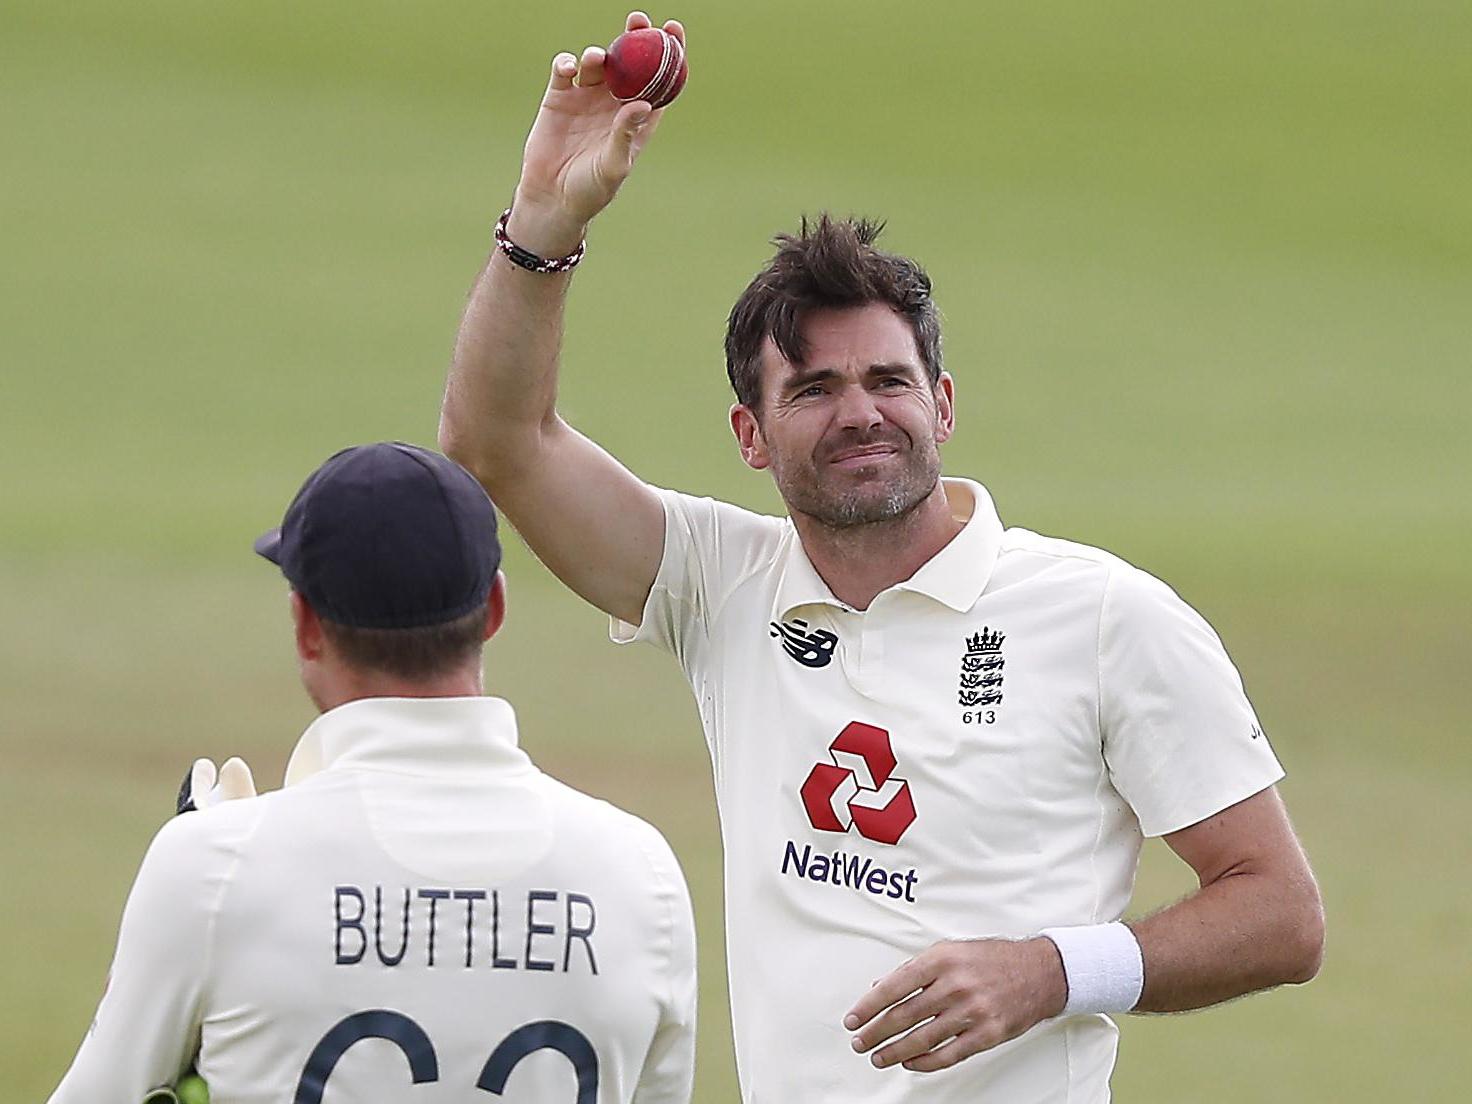 Cricketer James Anderson enters uncharted, not unchartered, territory